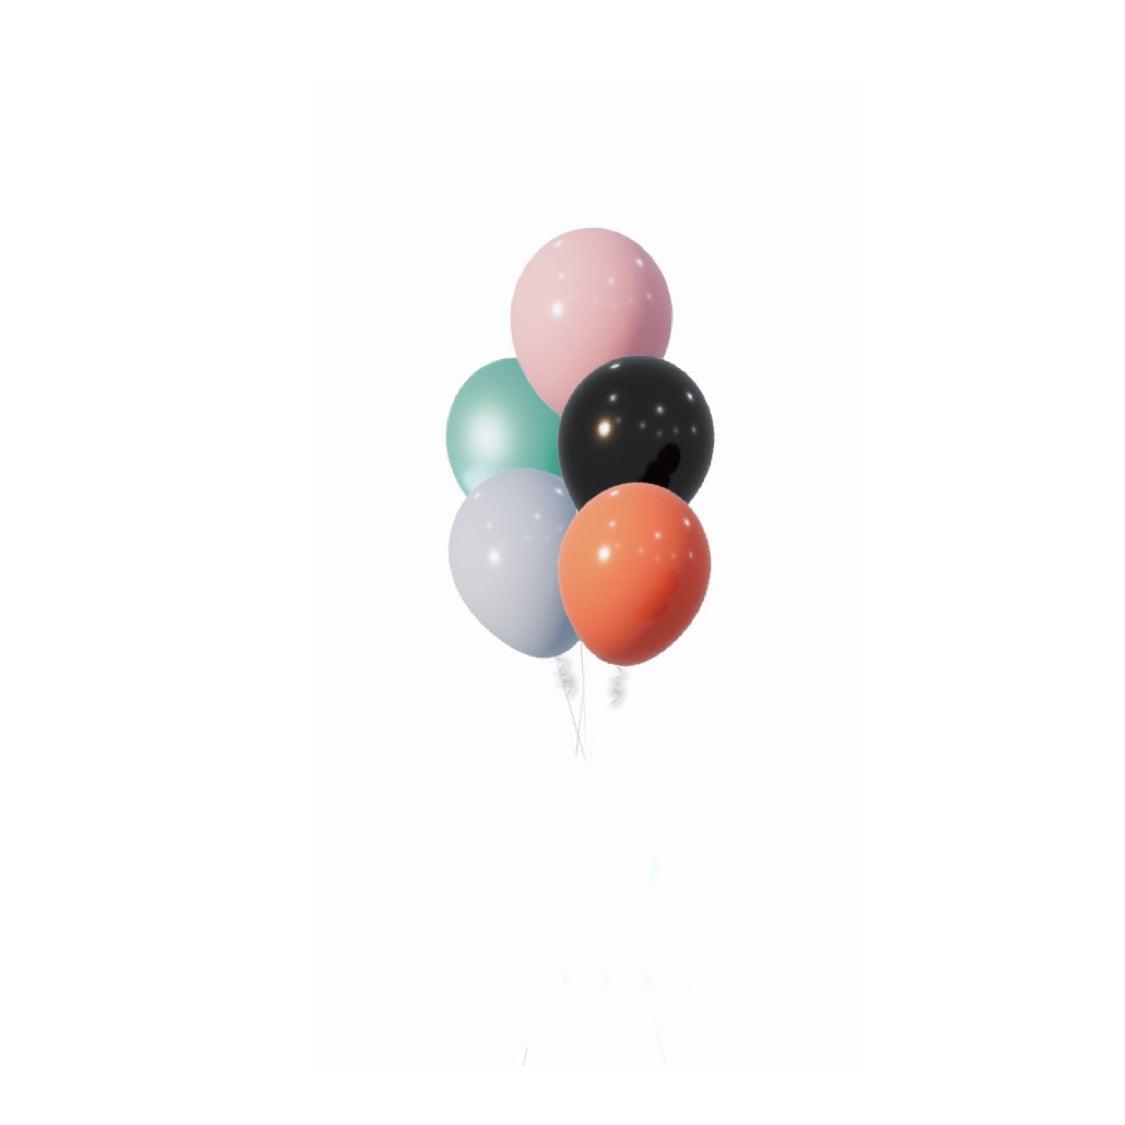 HALLOWEEN THEME - 11IN BALLOONS - BOUQUET OF 5 - ONE UP BALLOONS